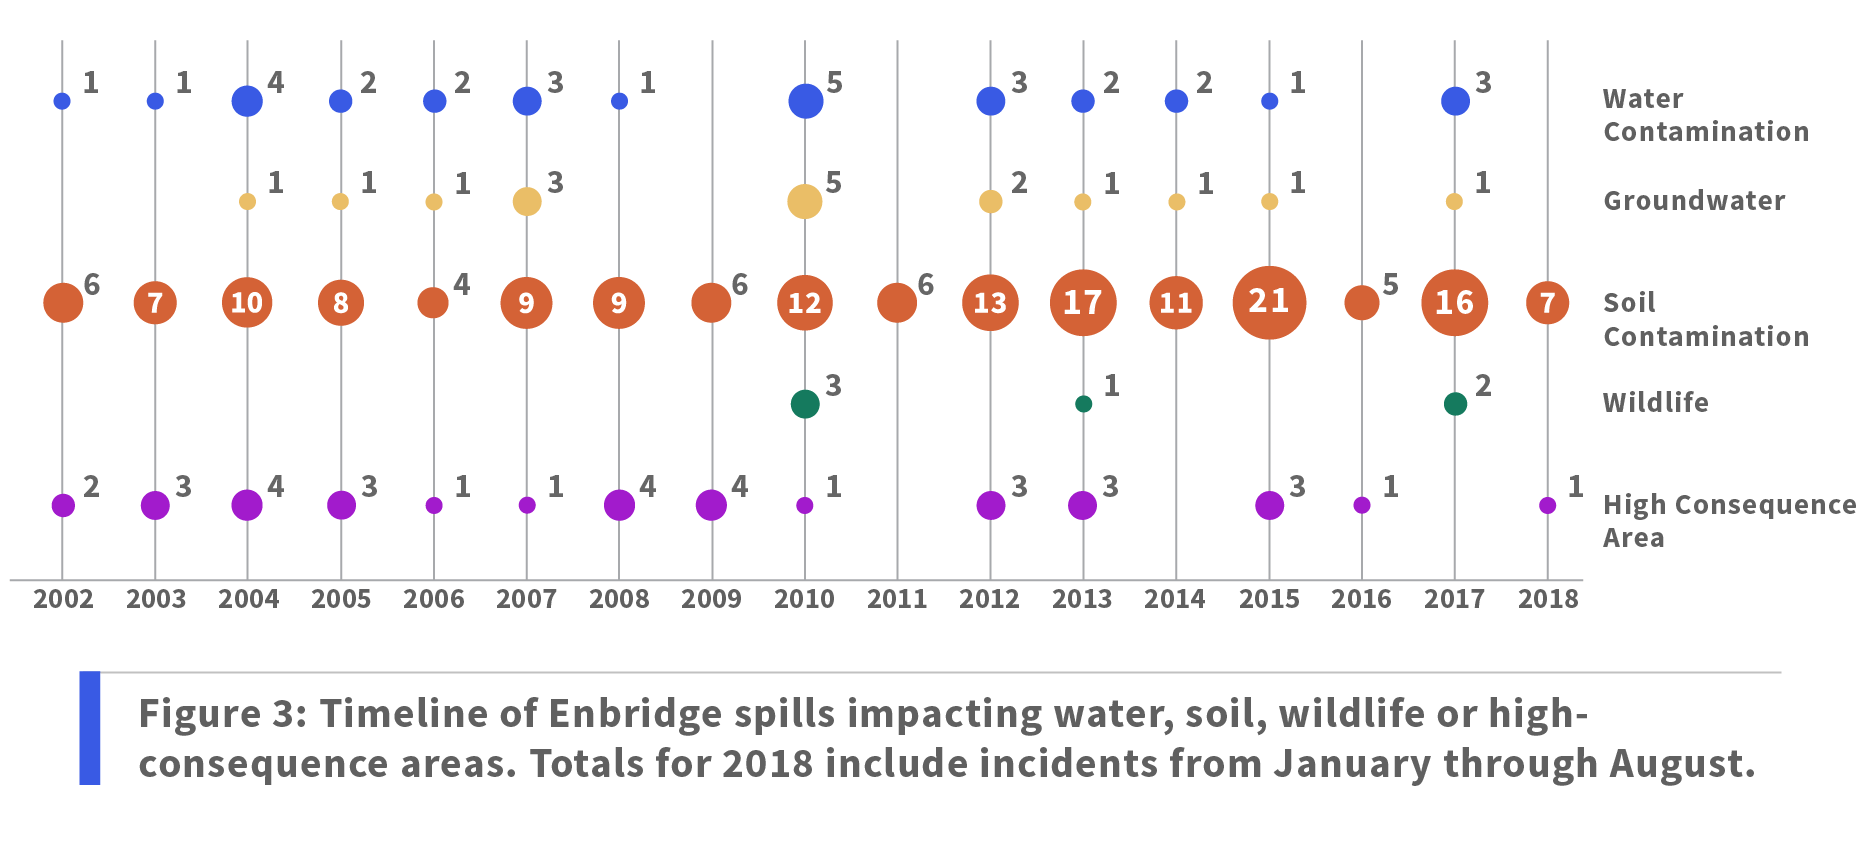 Figure 3: Timeline of Enbridge spills impacting water, soil, wildlife or high-consequence areas. Totals for 2018 include incidents from January through August.